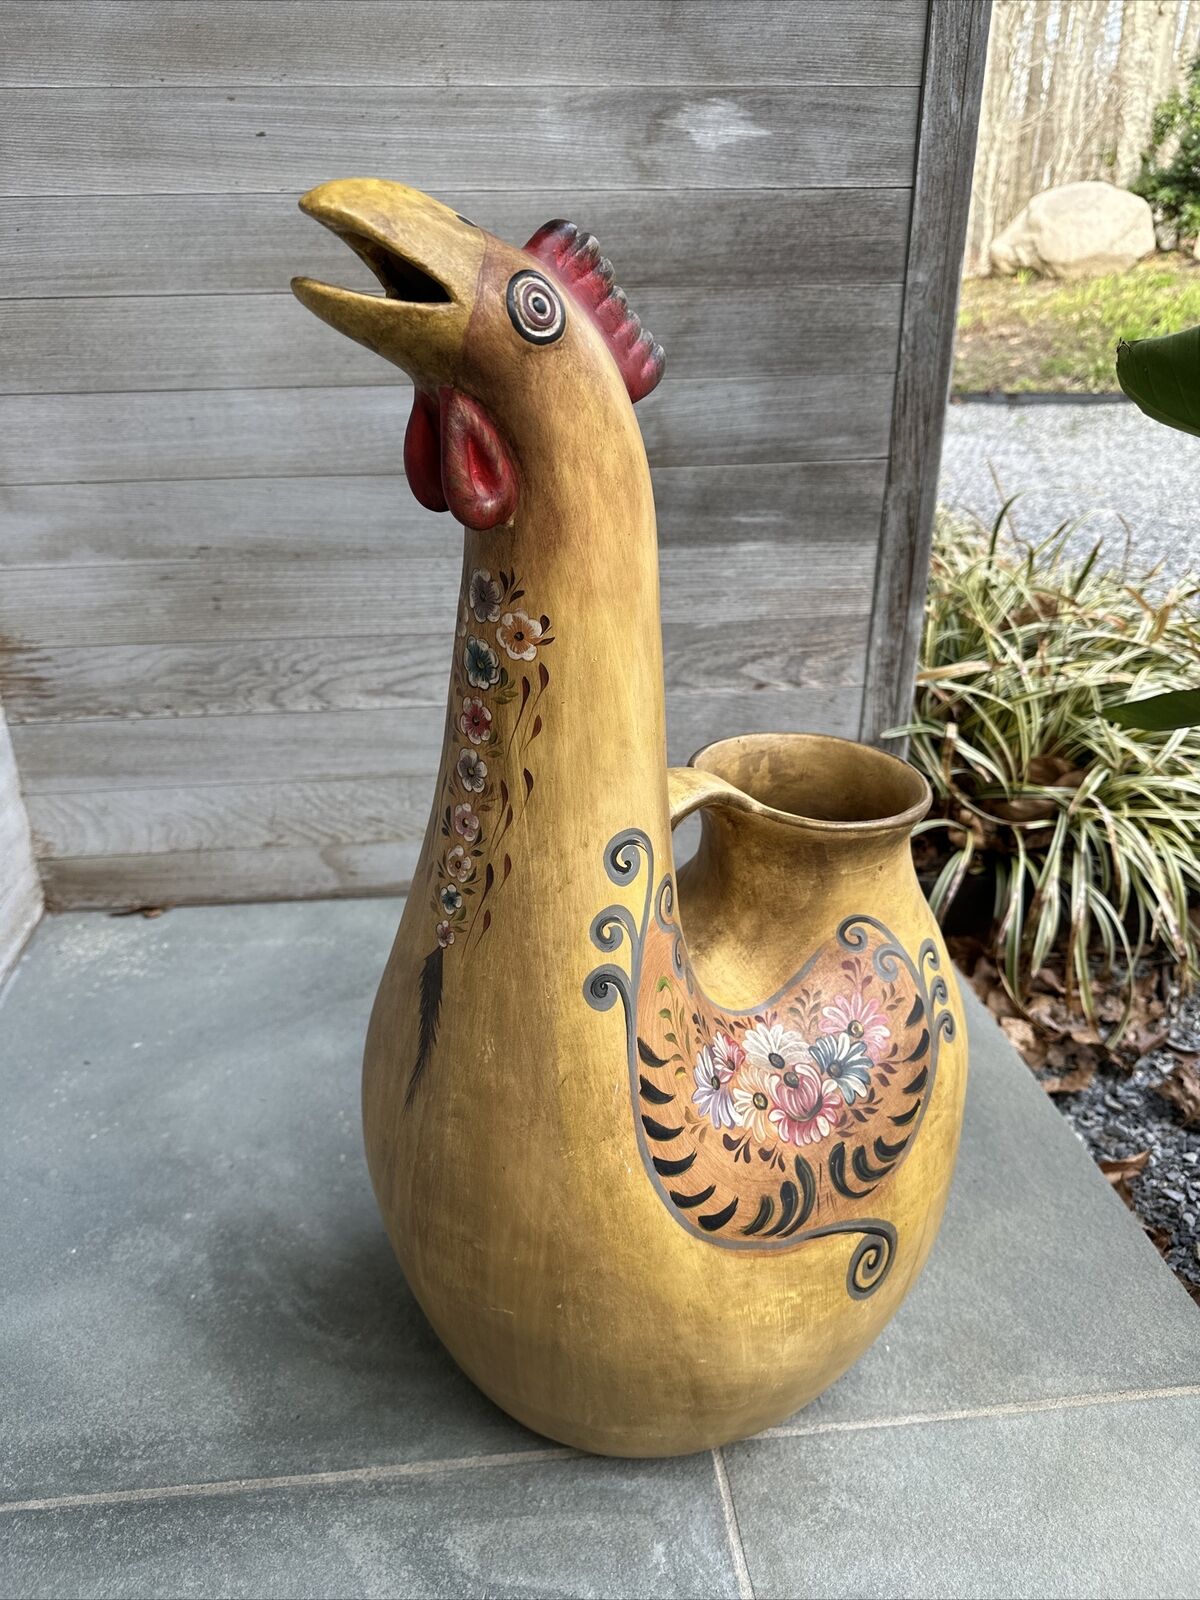 VINTAGE HAND PAINTED PERUVIAN LARGE TERRACOTTA CHICKEN POTTERY PITCHER 26h x 16w